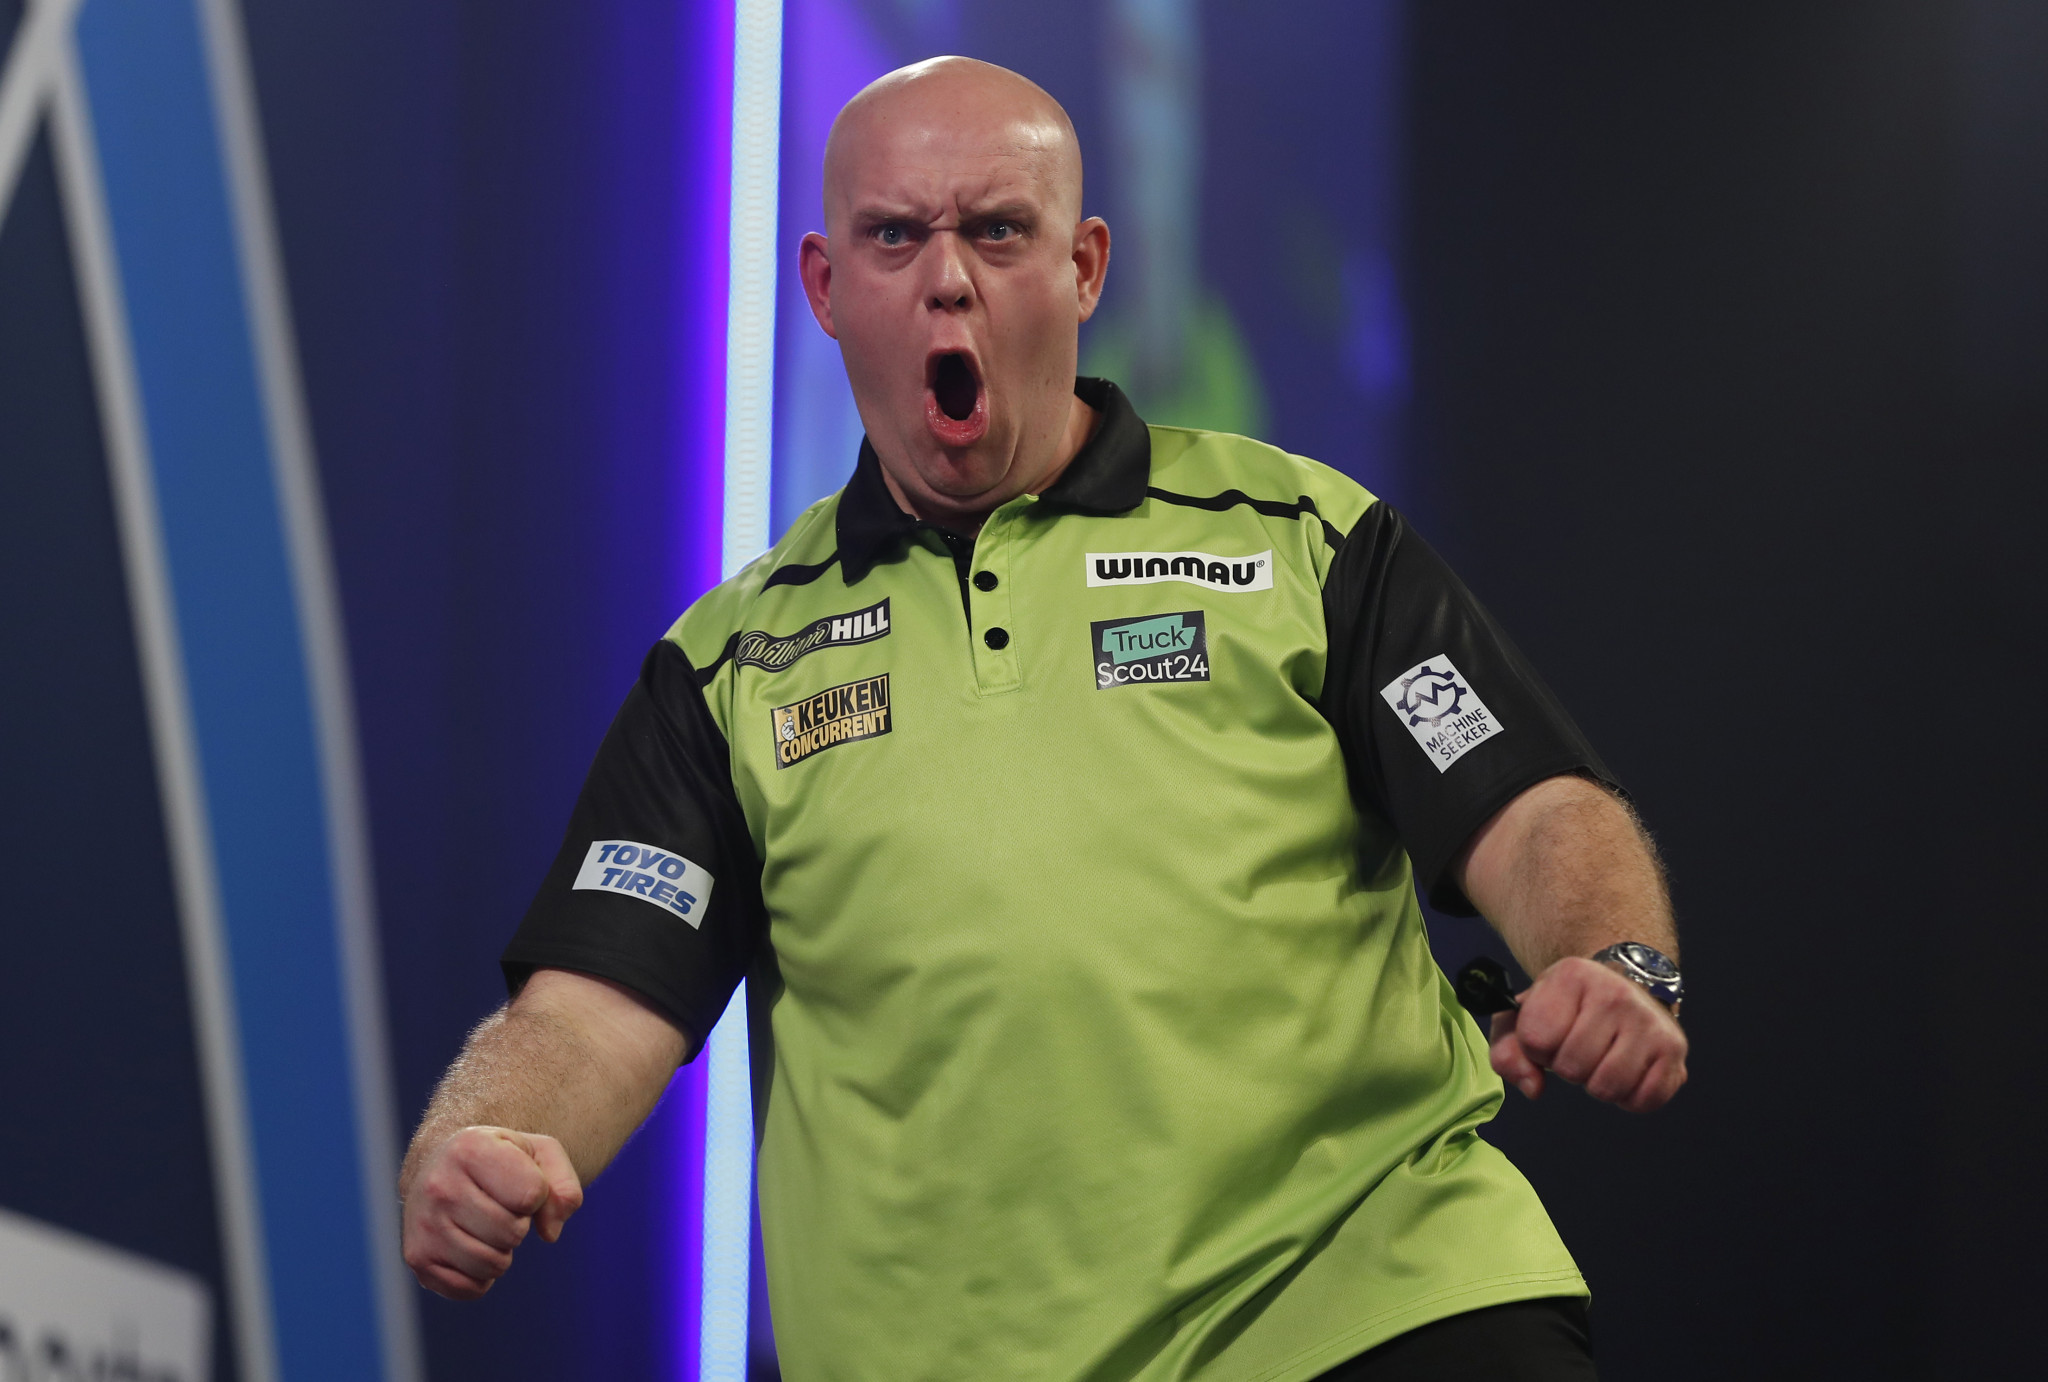 World number one Michael Van Gerwen reached the third round of the PDC World Darts Championship after defeating Ryan Murray in four sets ©Getty Images